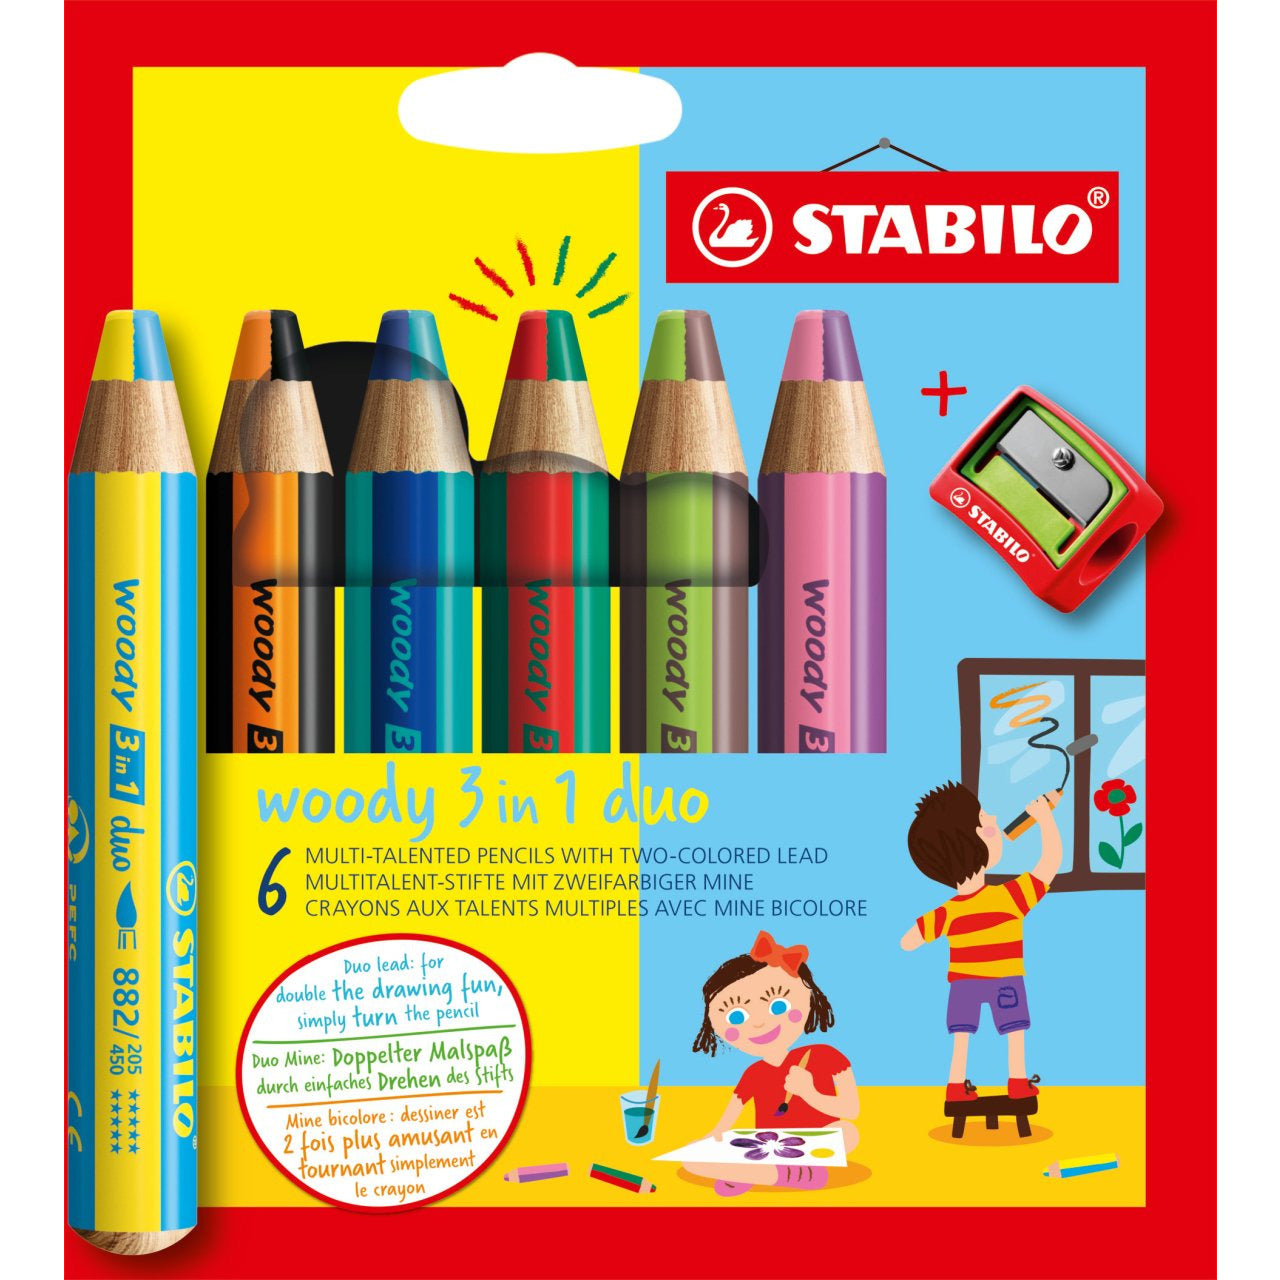 Stabilo Woody 3-in-1 Crayons - Duo